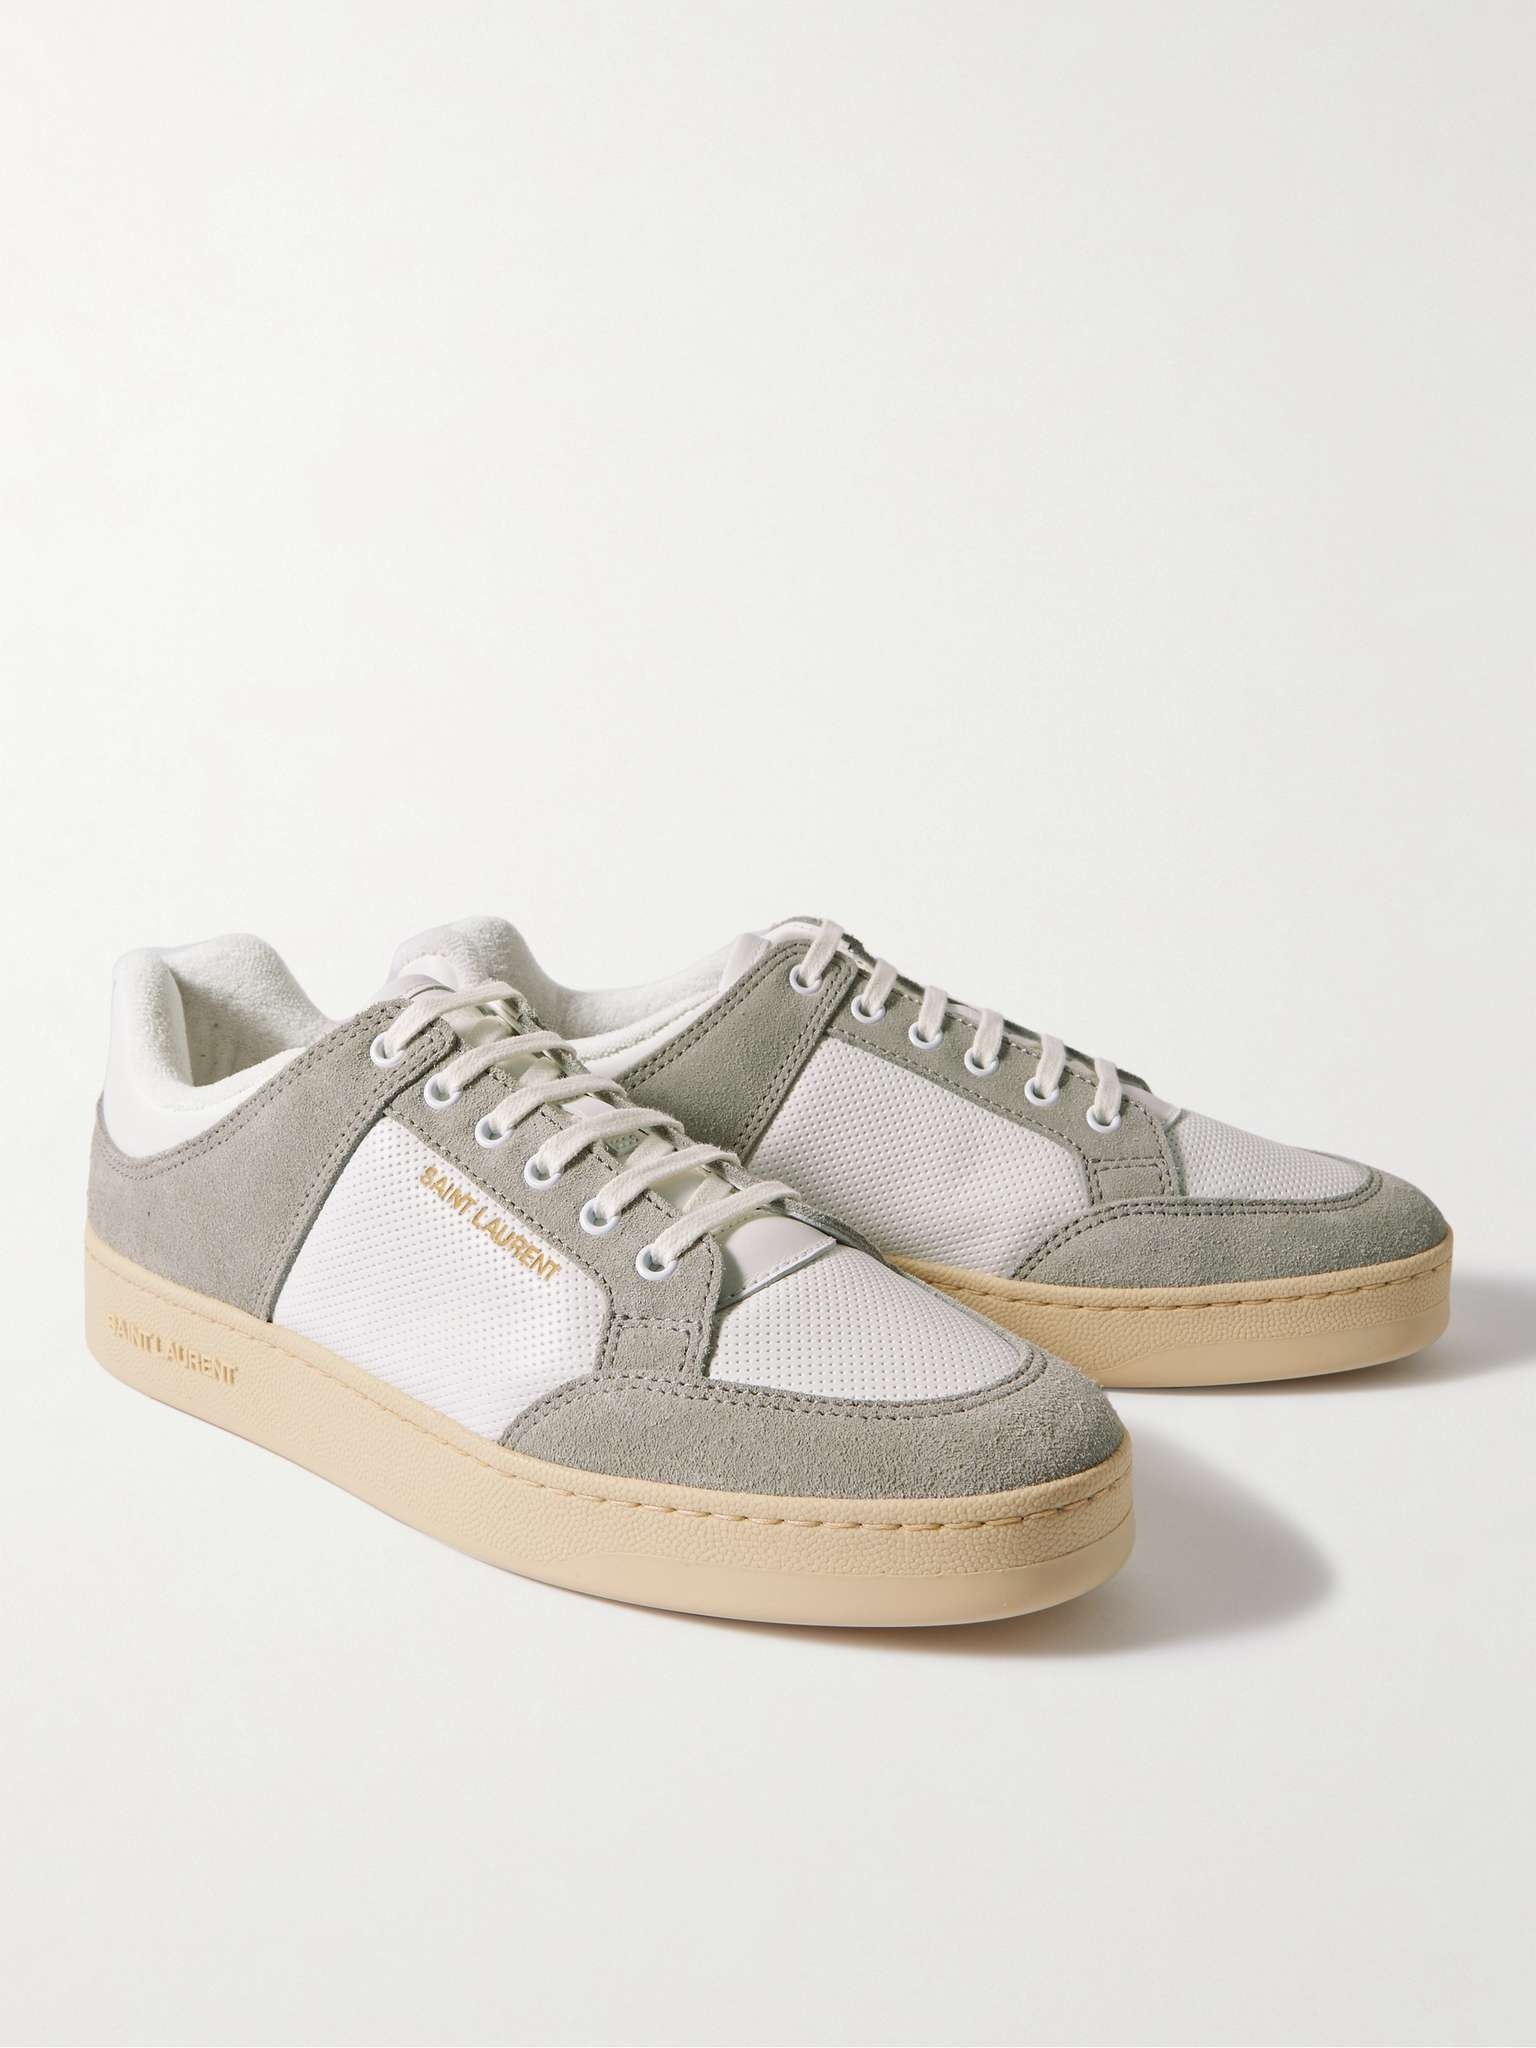 SL/61 Perforated Leather and Suede Sneakers - 4